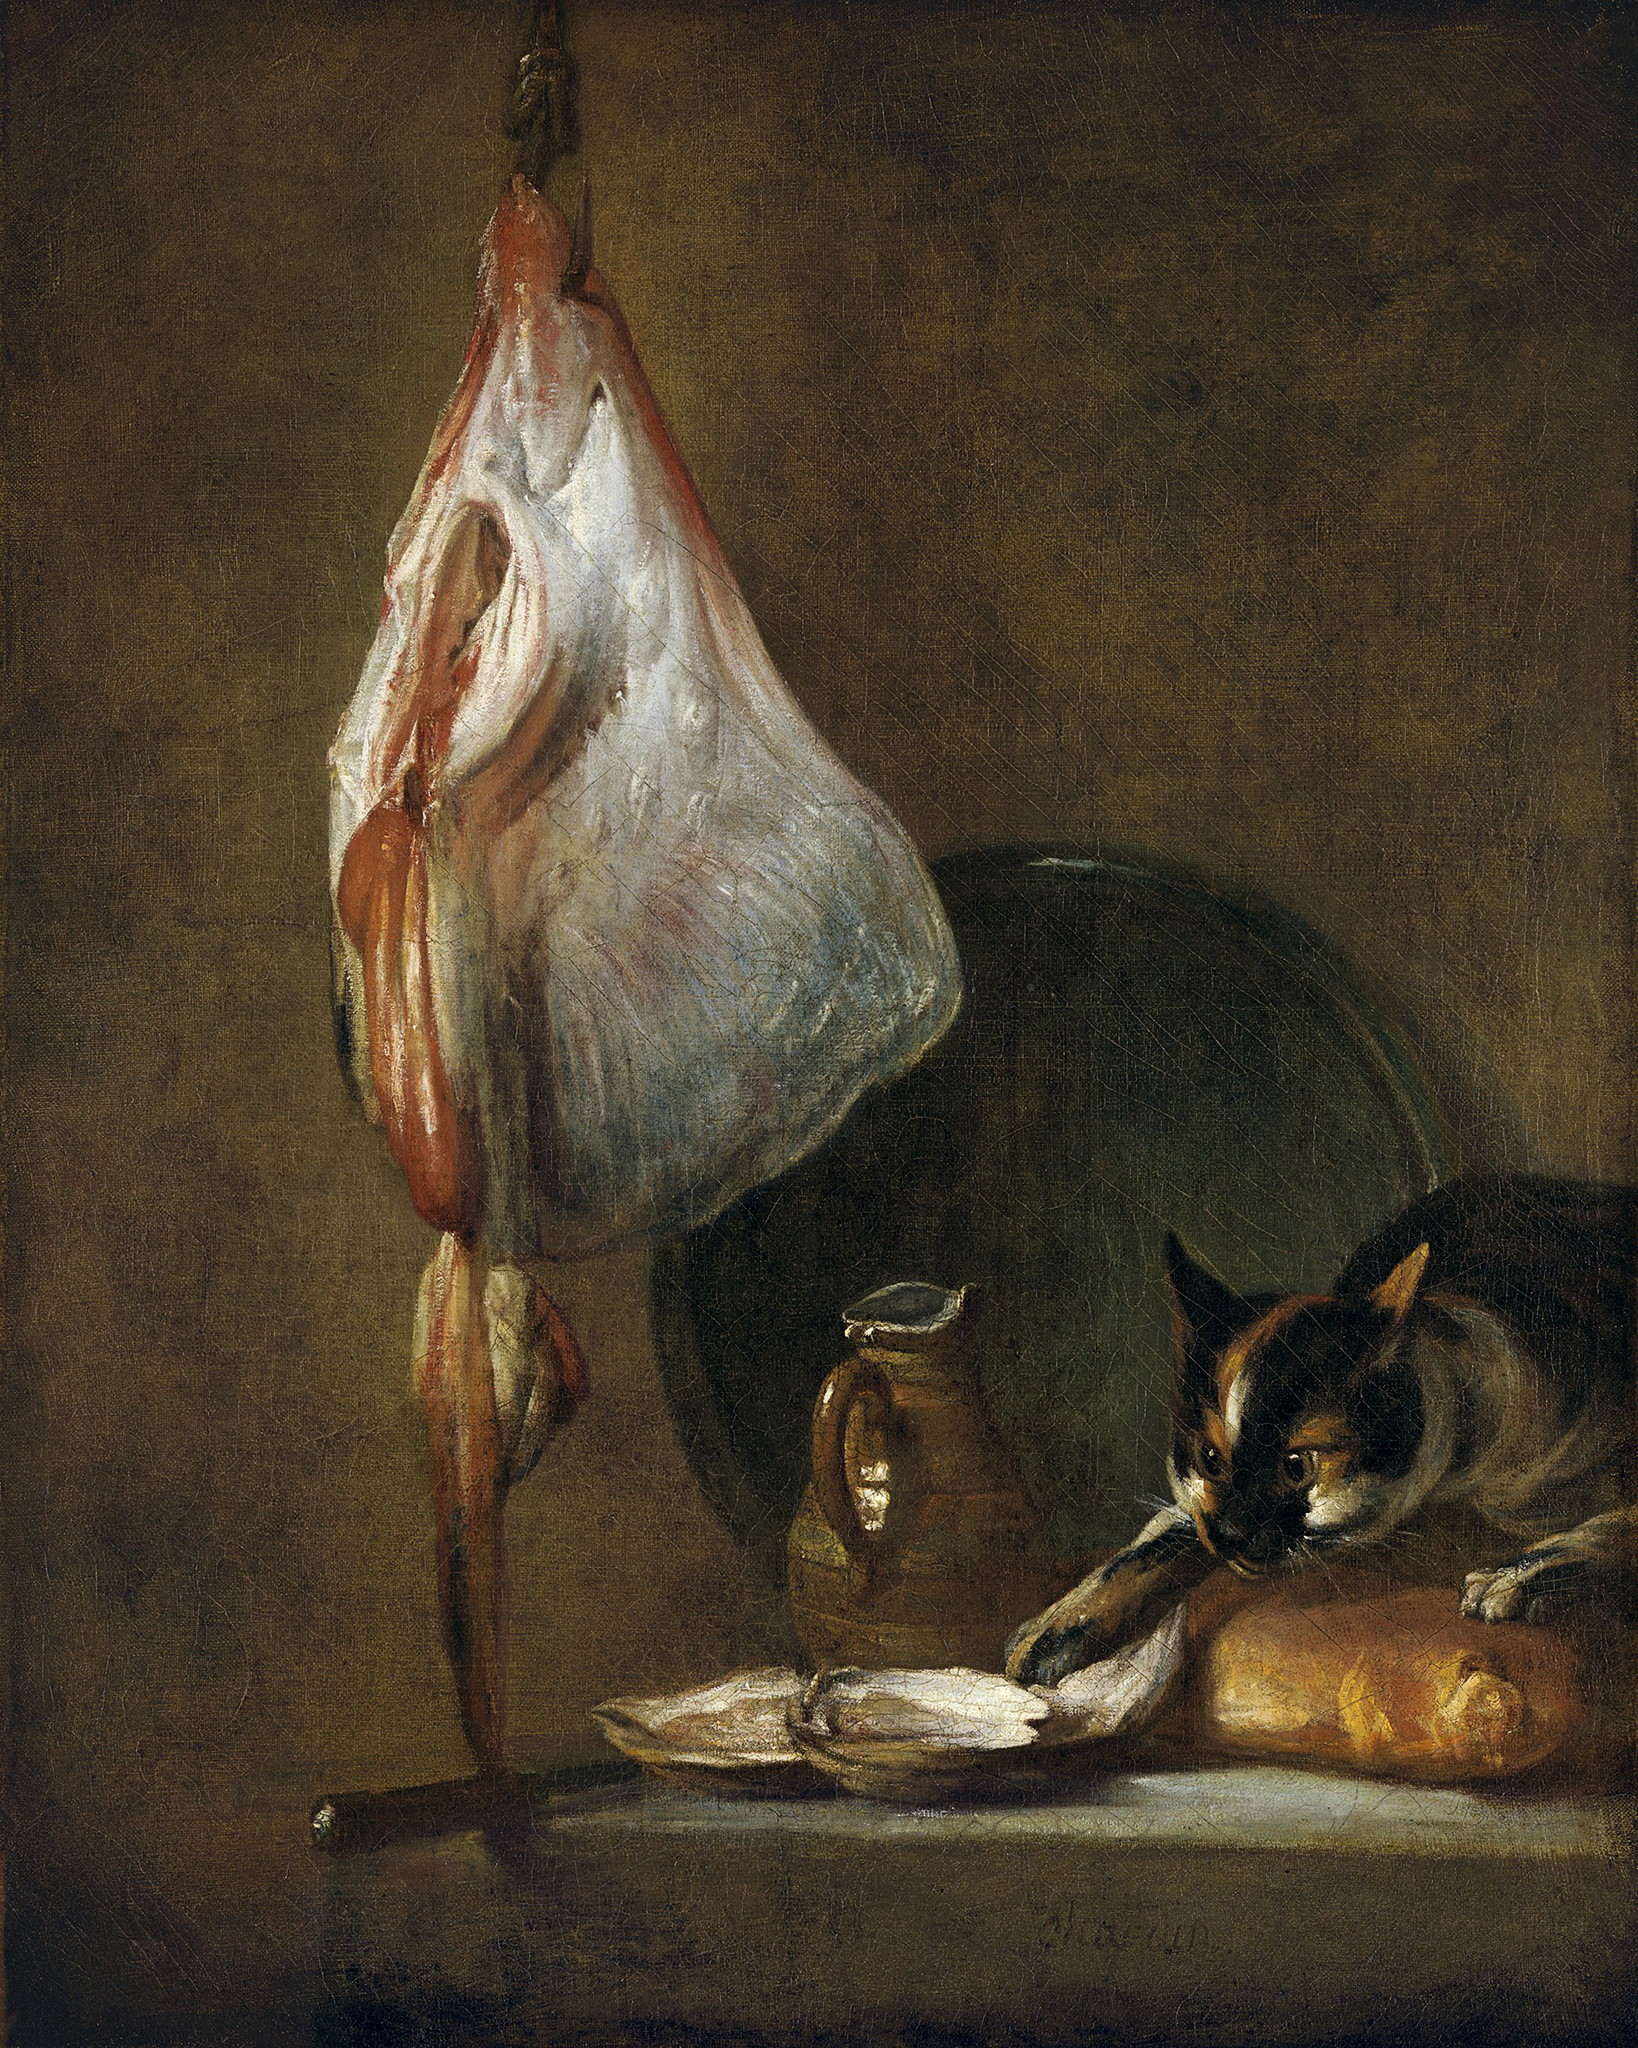 A painting of a black cat with orange and white stripes moving across a countertop. Above the cat, a big piece of hanging from a hook. The countertop has a glass bottle with a handle and a few oysters scattered along it.